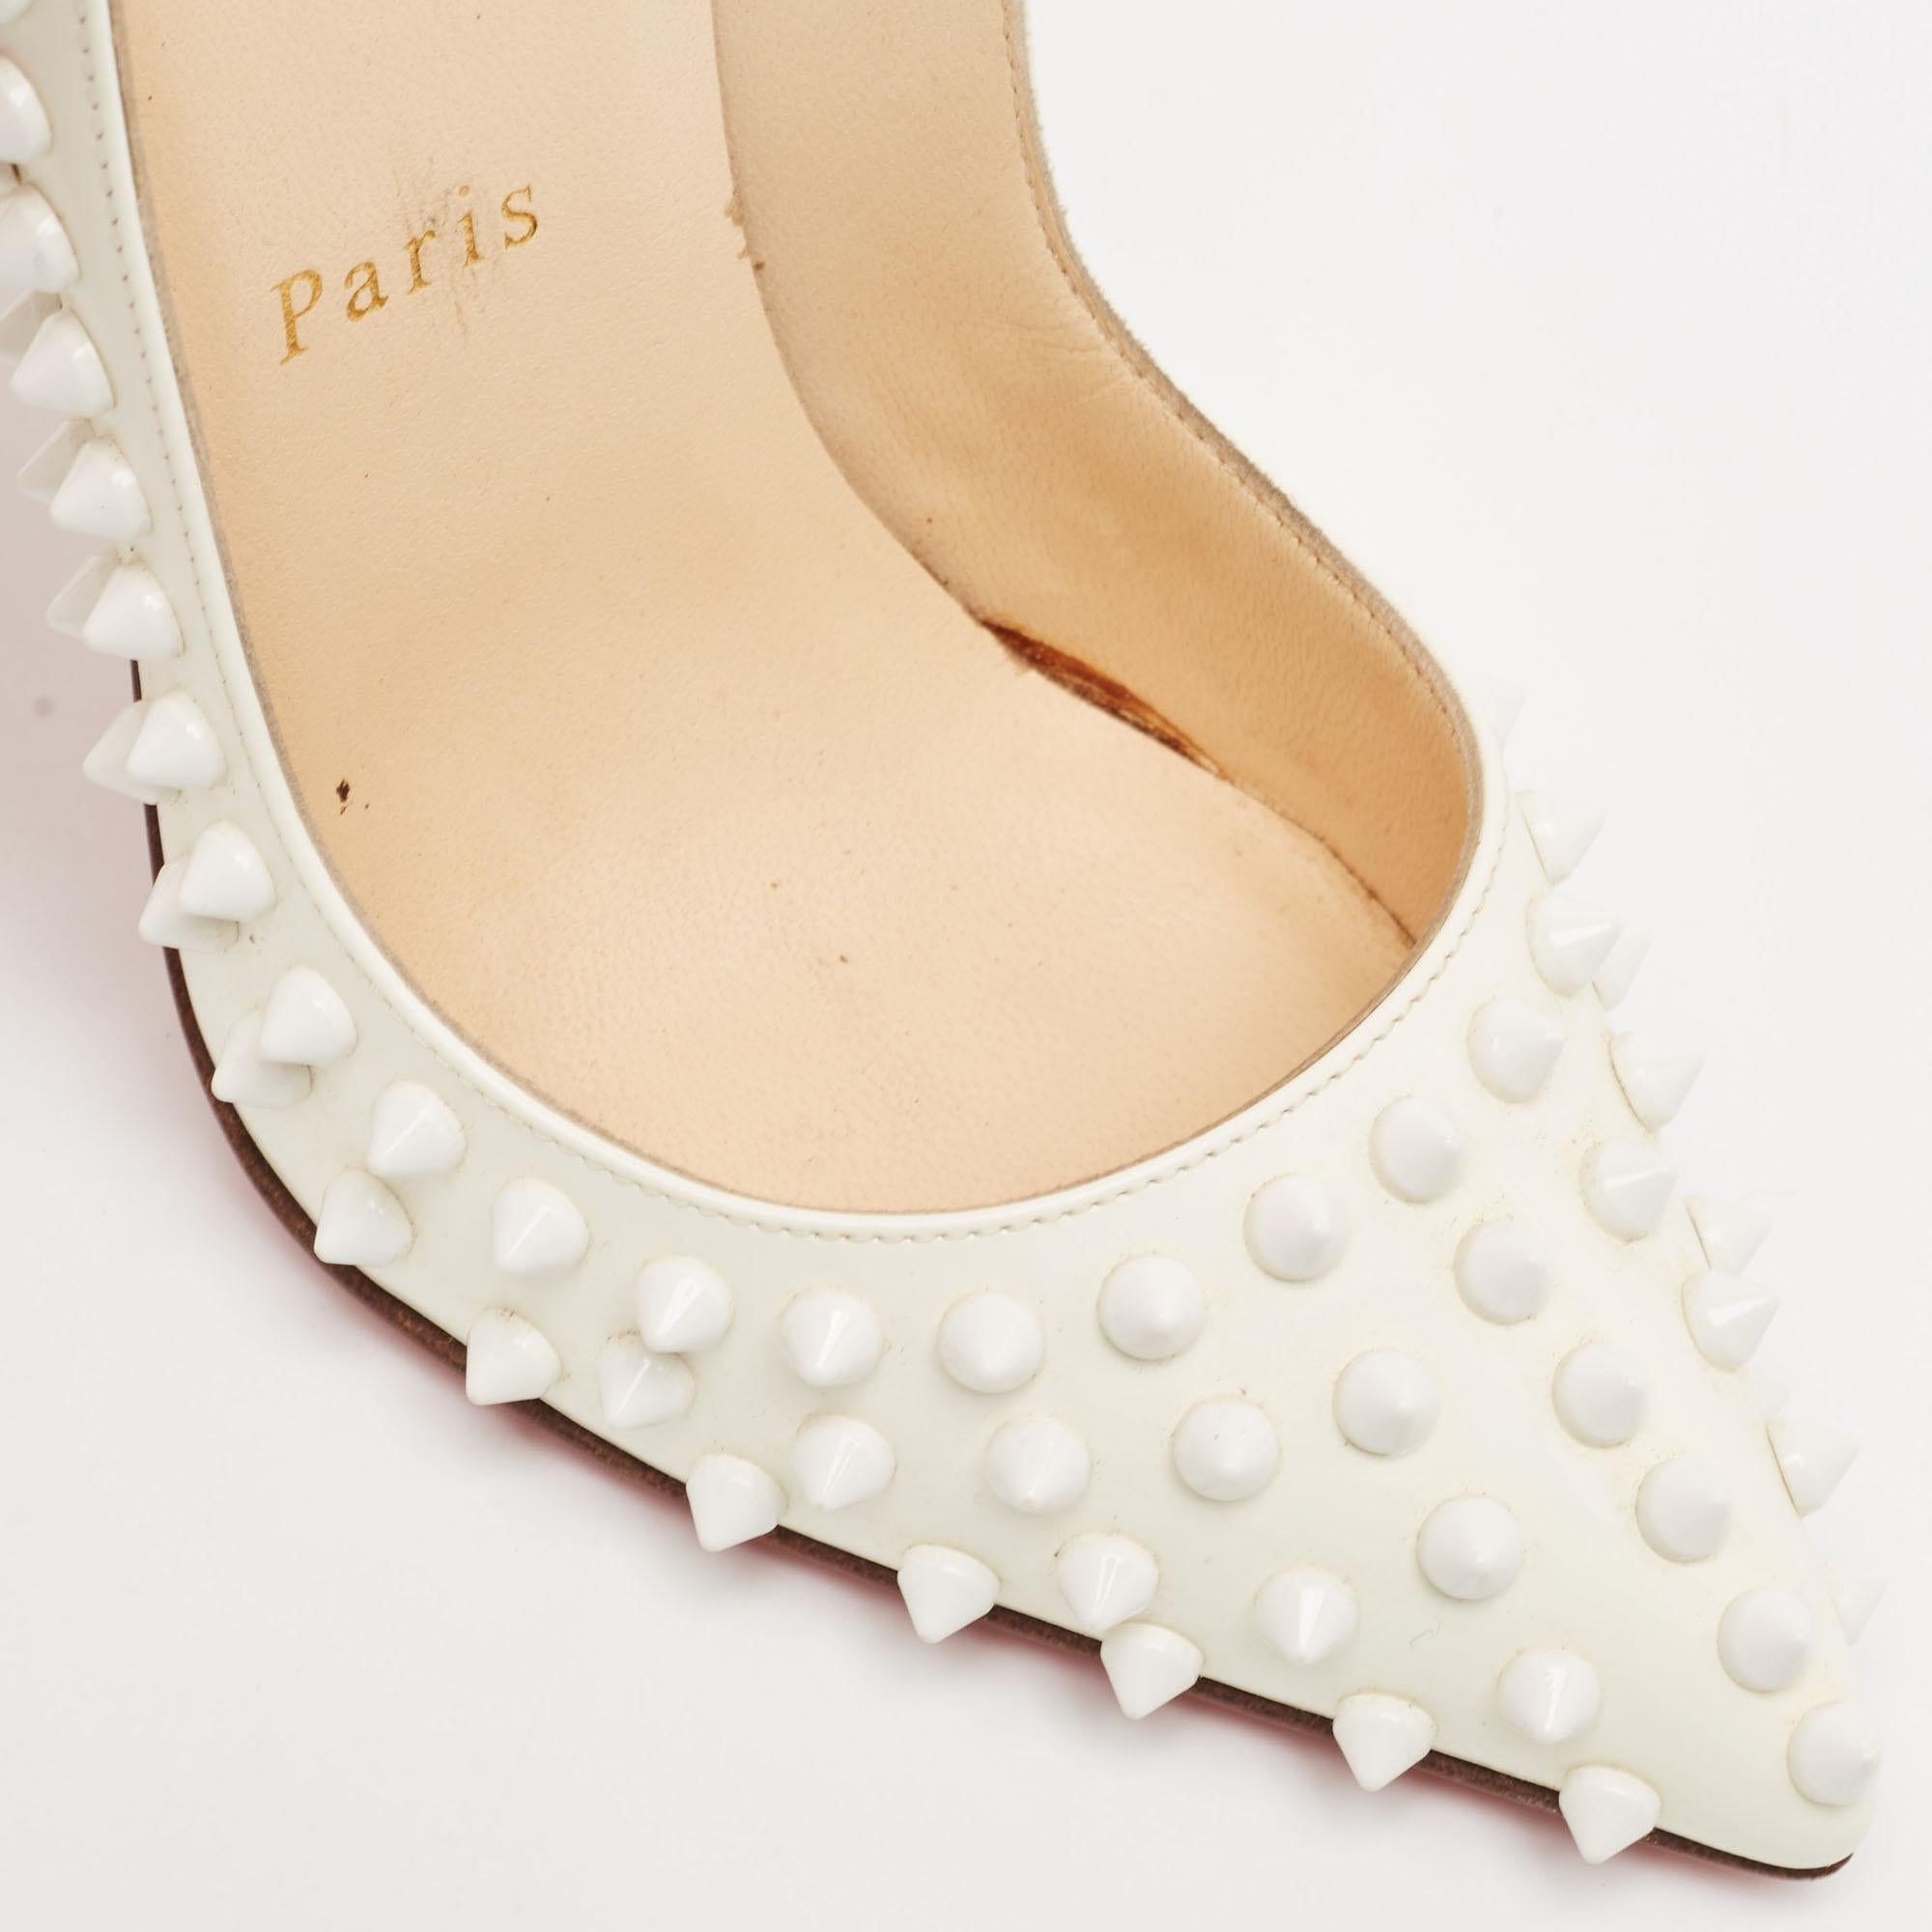 Christian Louboutin White Patent Leather Pigalle Spikes Pumps Size 36.5 In Excellent Condition For Sale In Dubai, Al Qouz 2